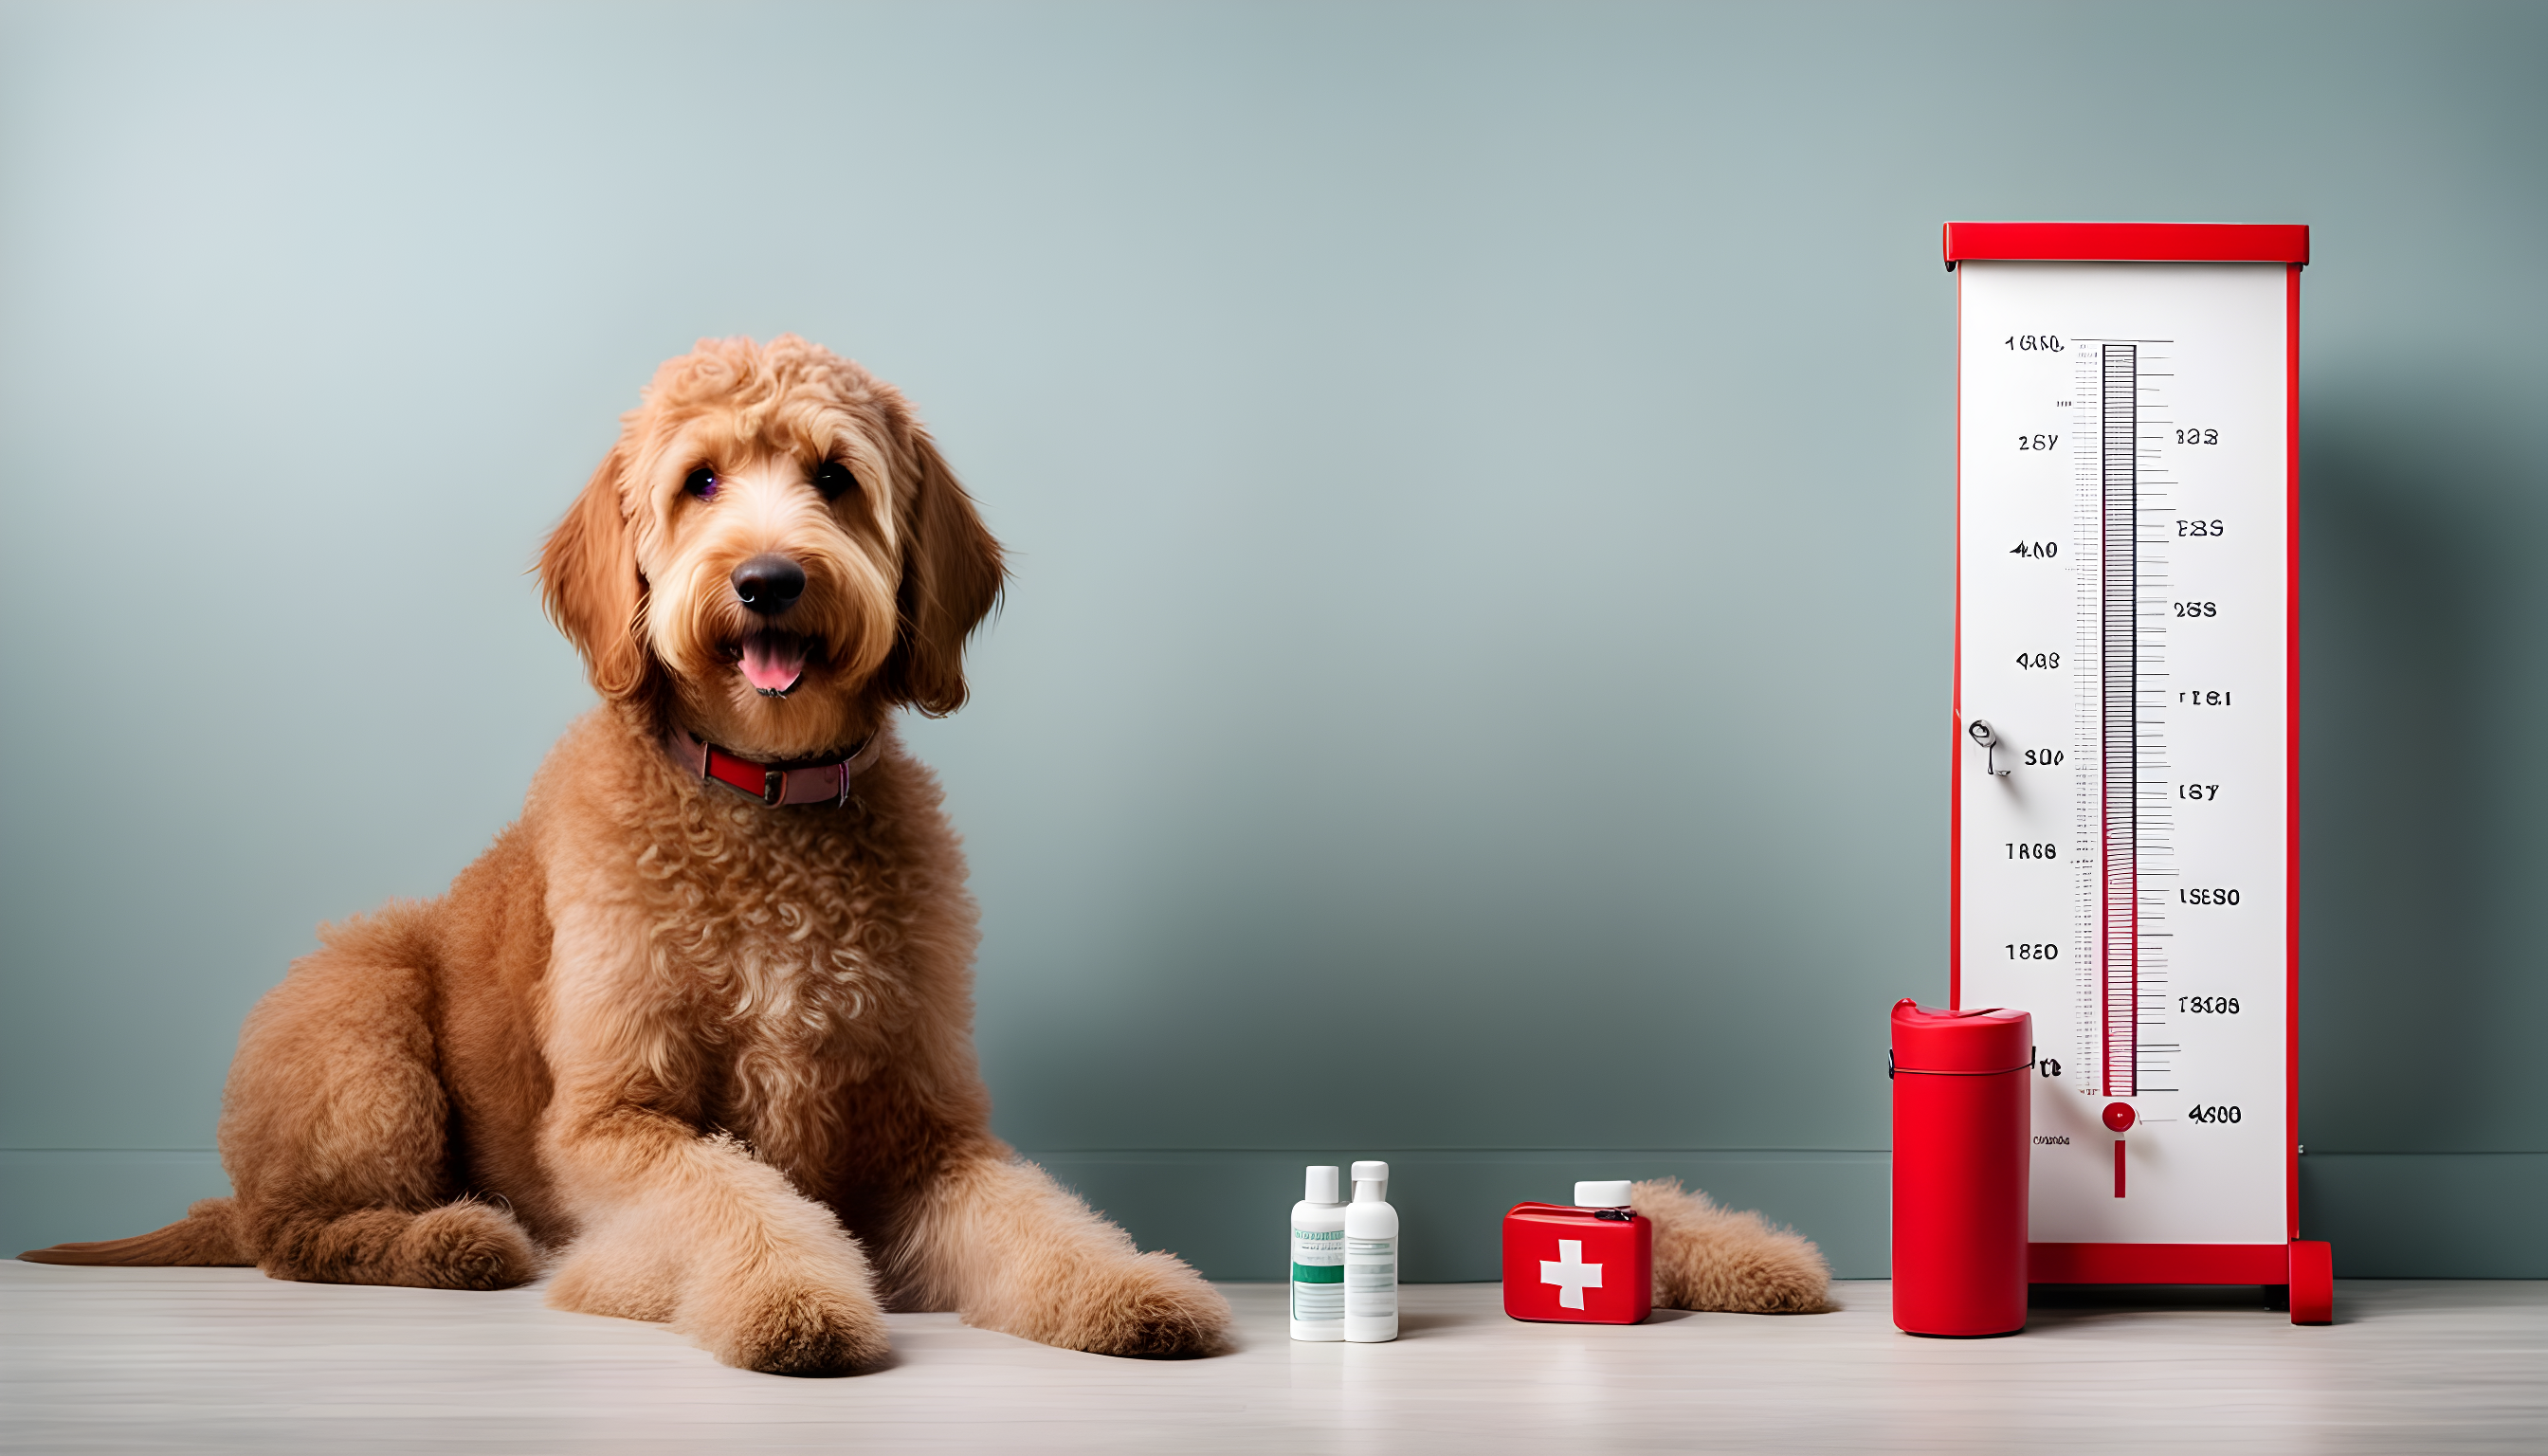 A Labradoodle sitting next to a growth chart on one side and a first aid kit on the other, emphasizing the balance between growth and health.